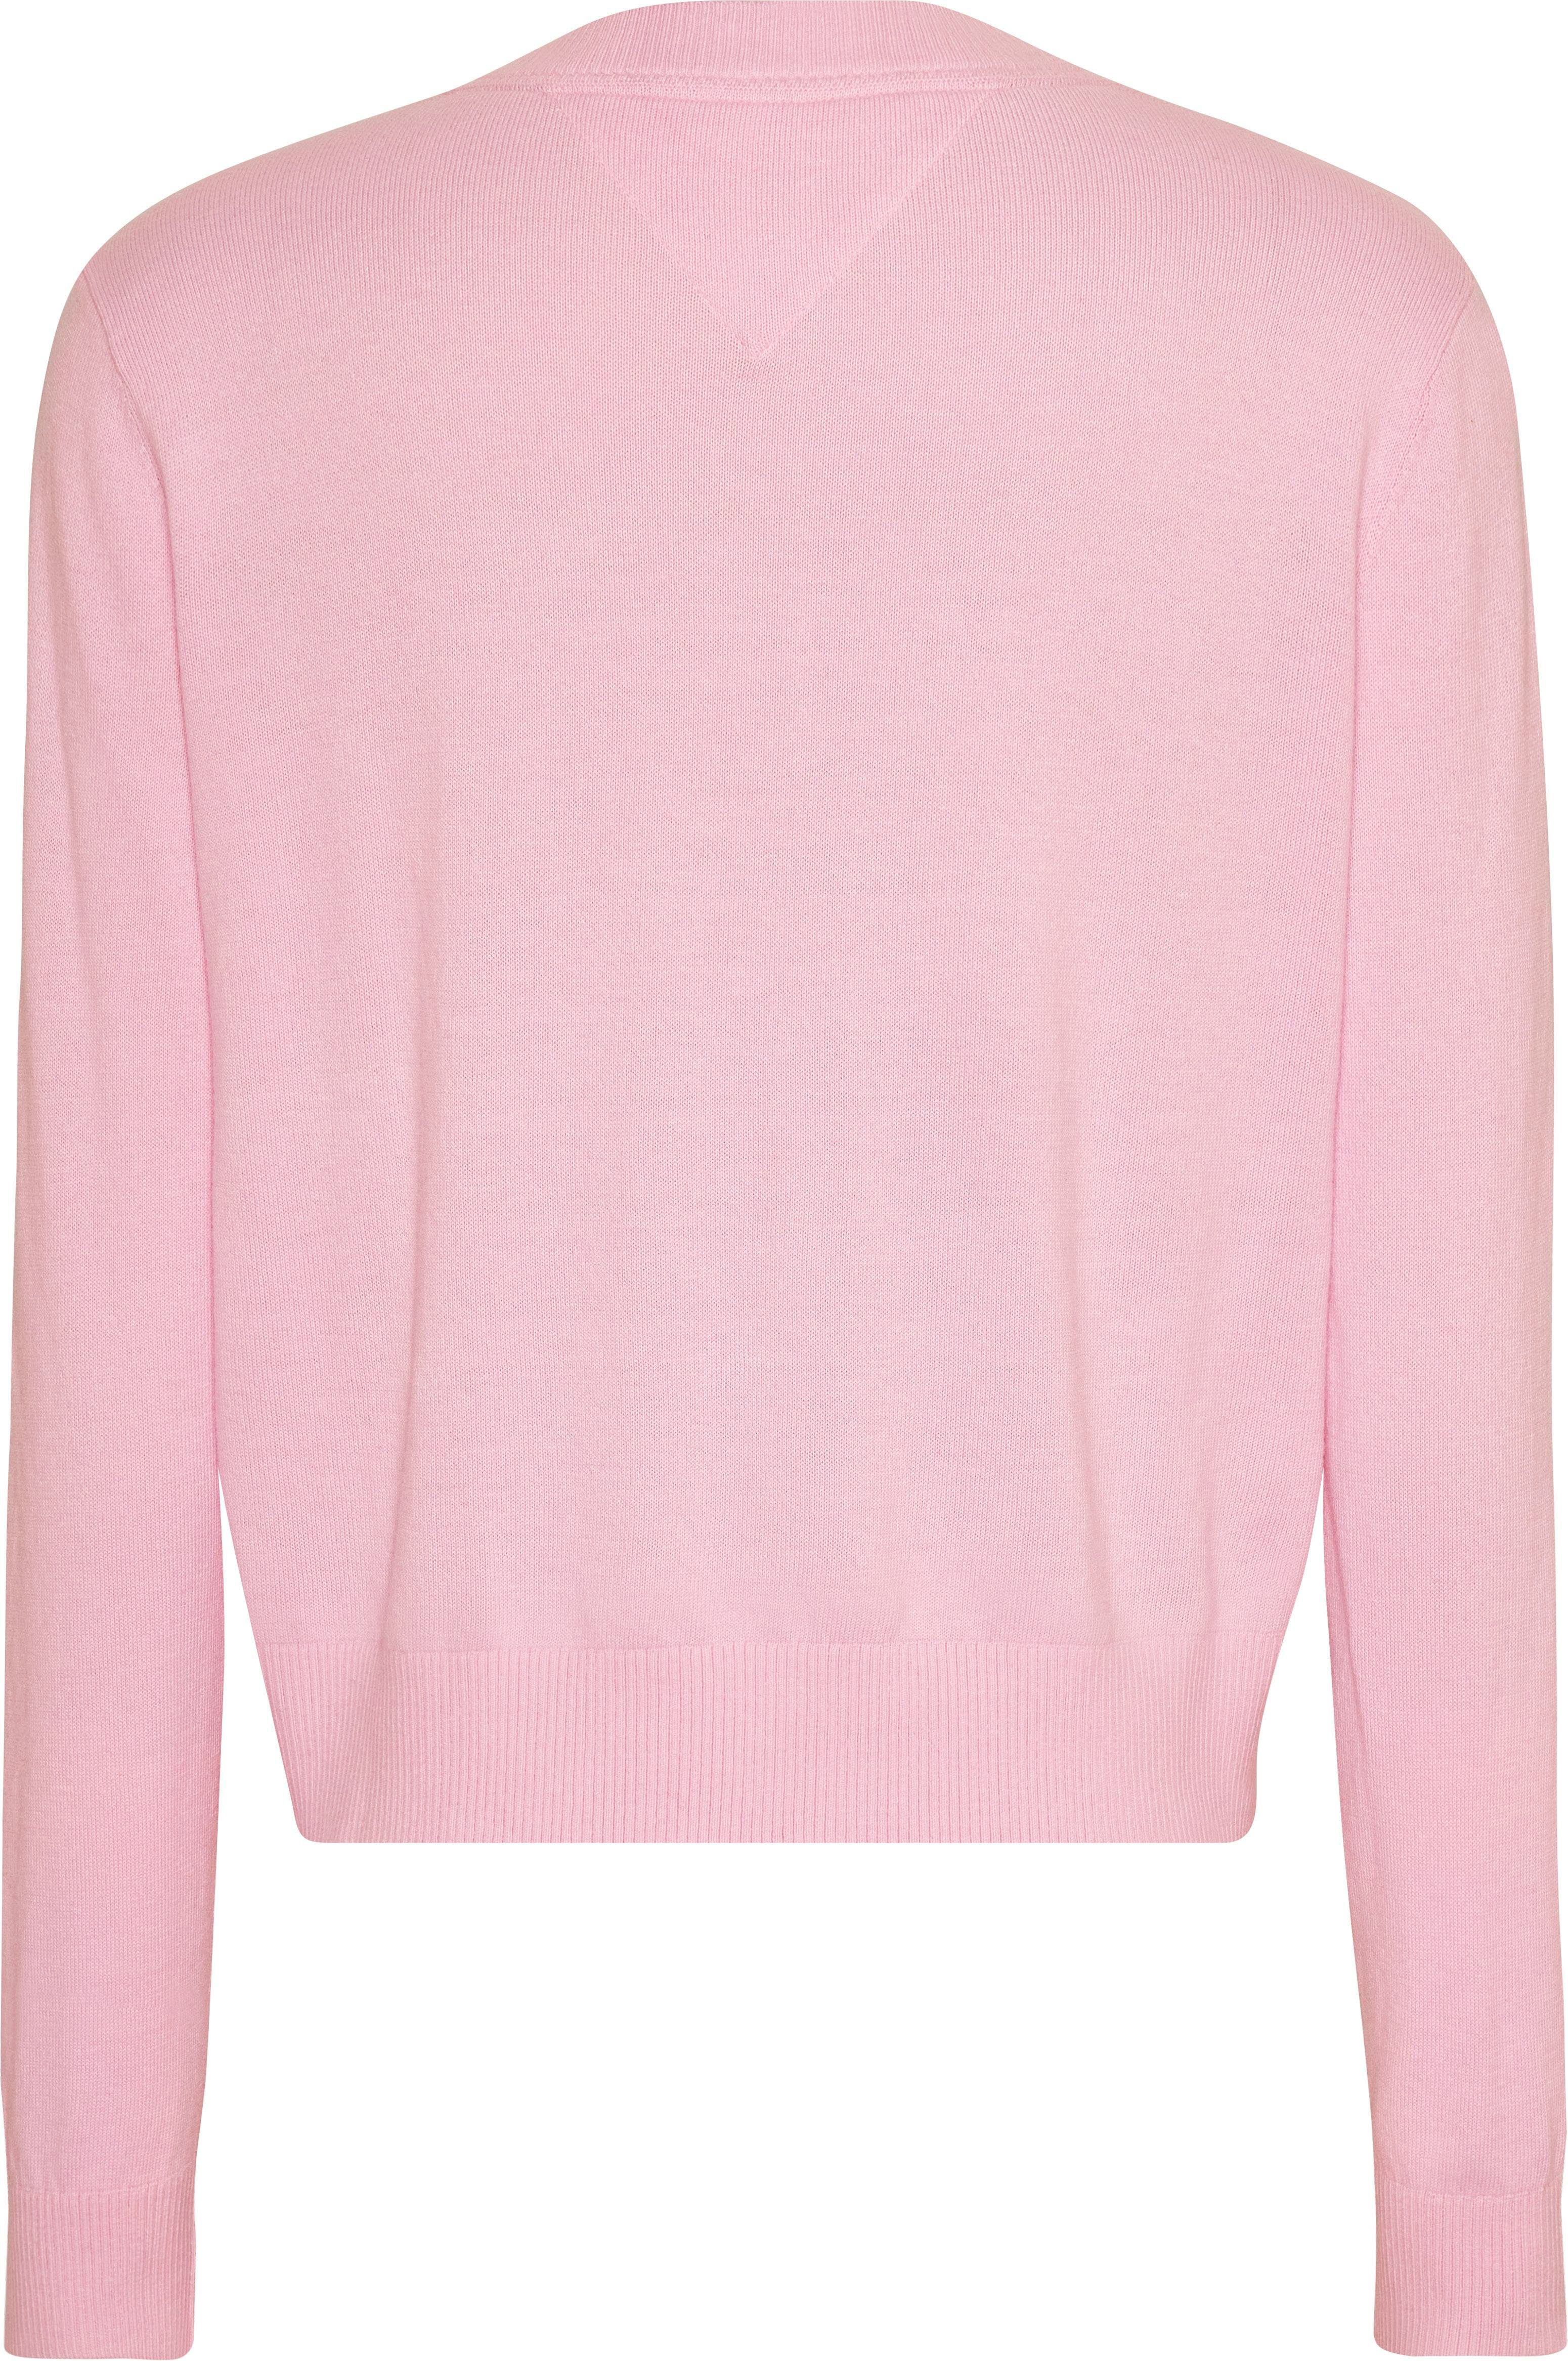 Markenlabel Jeans ESSENTIAL TJW Orchid V-Ausschnitt-Pullover Jeans VNECK mit Tommy Tommy French SWEATER